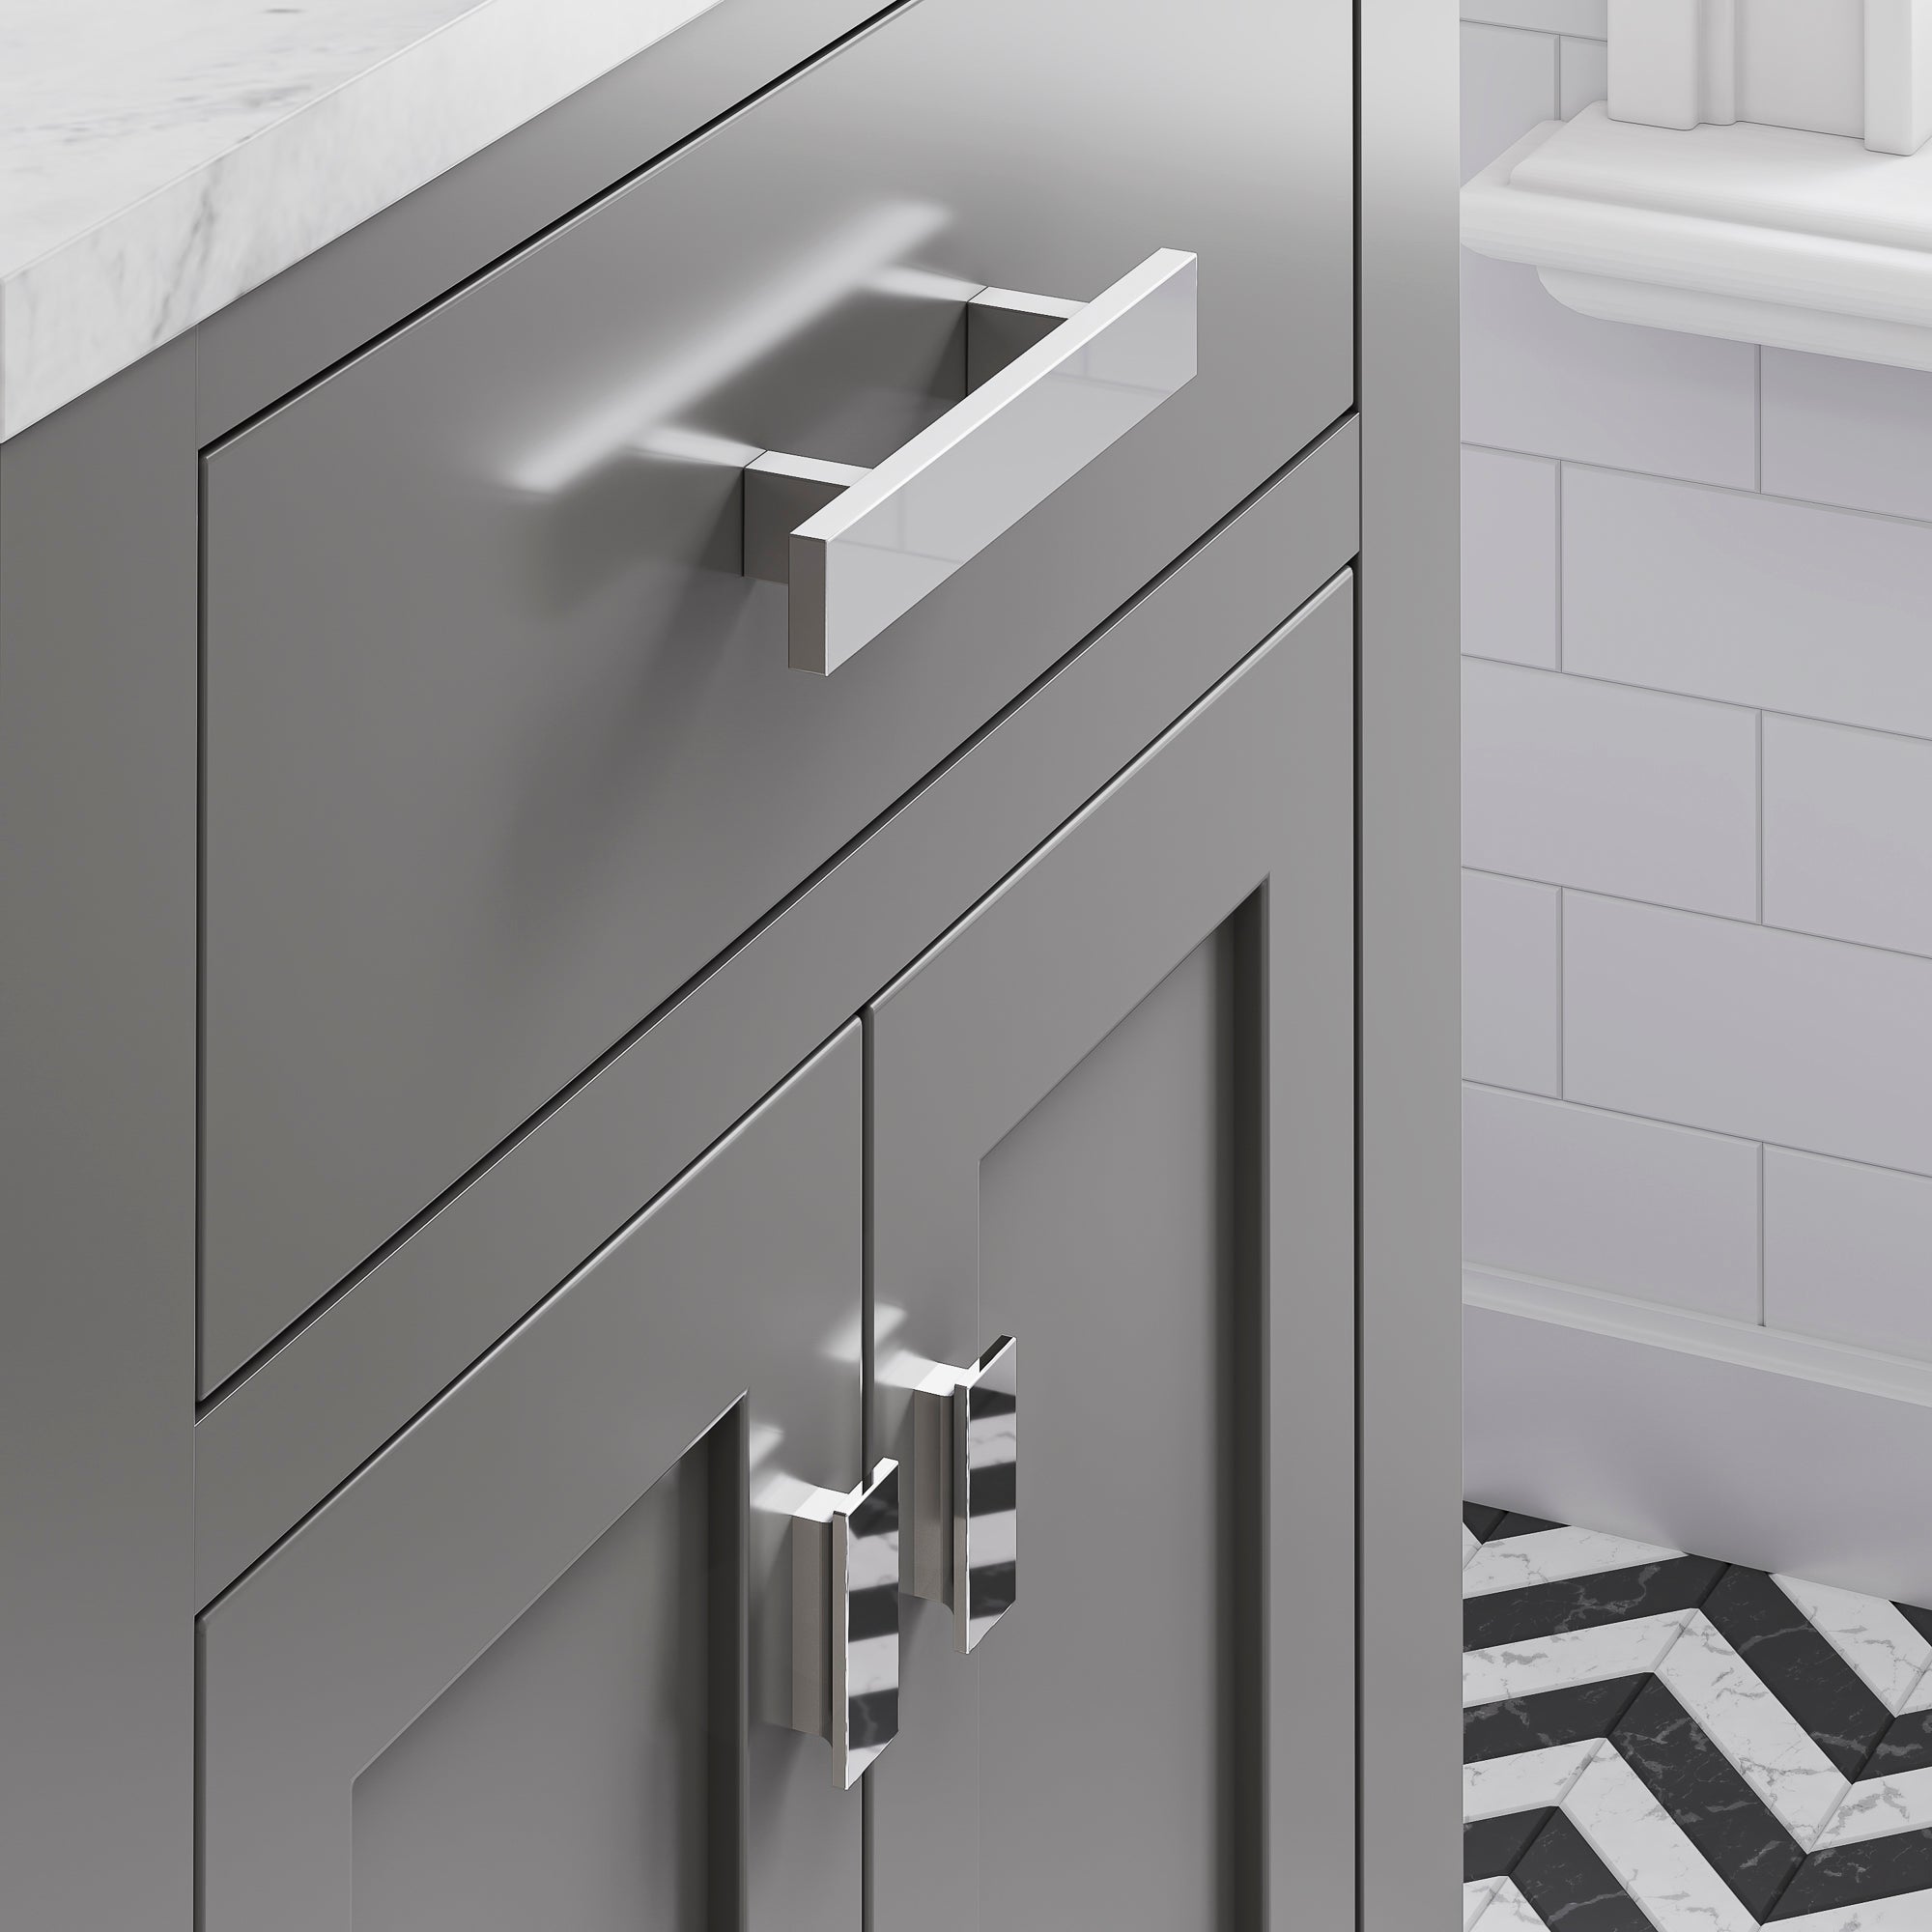 Water Creation | 24 Inch Cashmere Grey Single Sink Bathroom Vanity With Faucet From The Madison Collection | MS24CW01CG-000BX0901